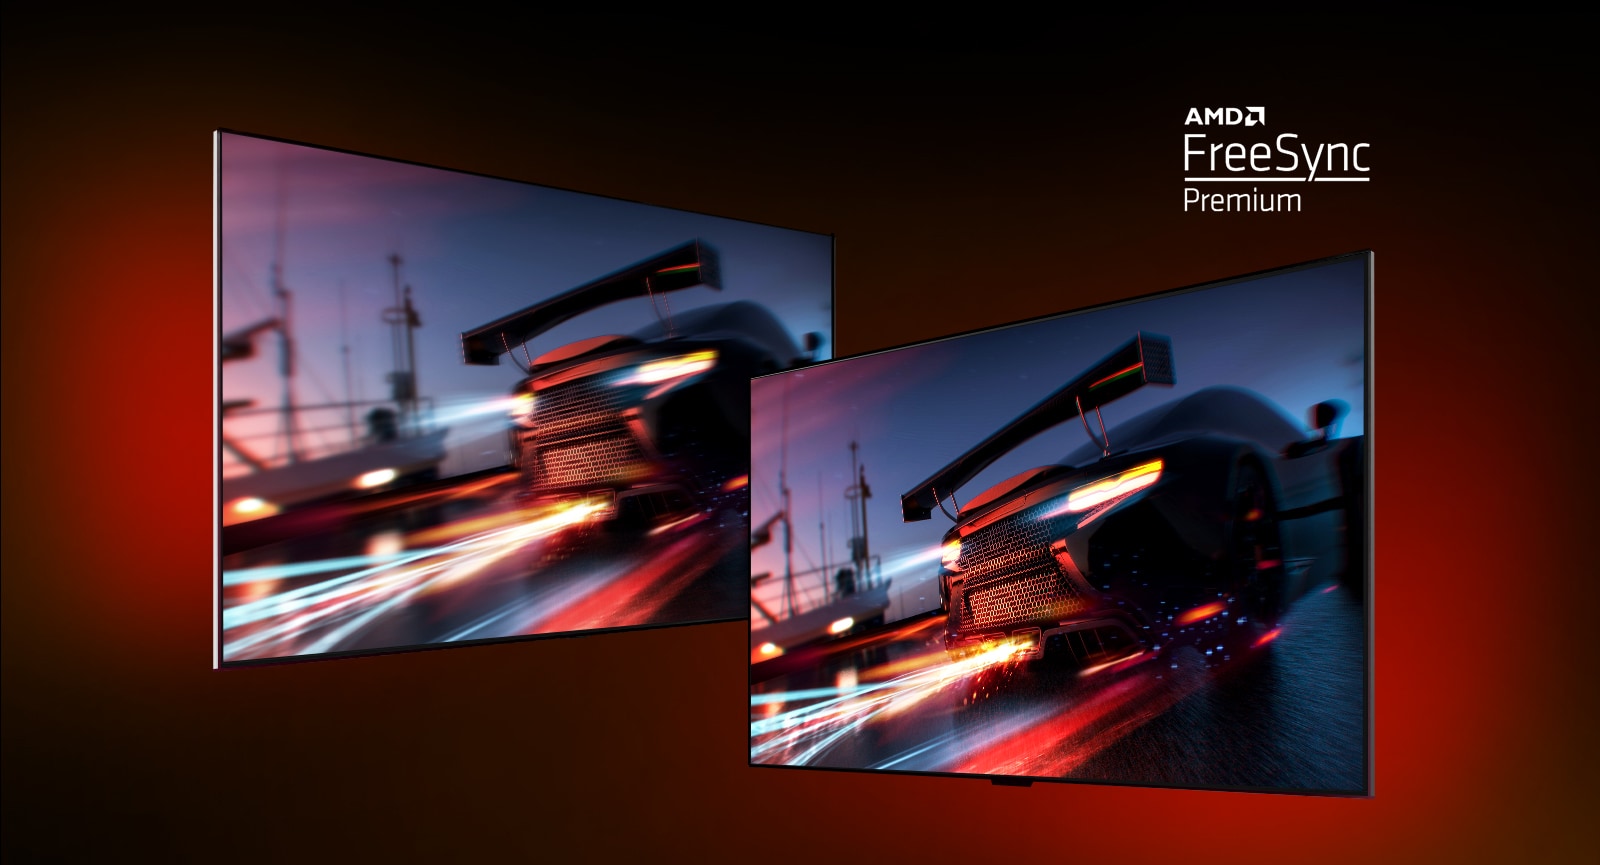 There are two TVs - the one on the left shows a FORTNITE game scene with a racing car.  On the right is also the same scene from the game, but with a brighter and clearer image.  The AMD FreeSync premium logo is shown in the upper right corner.  